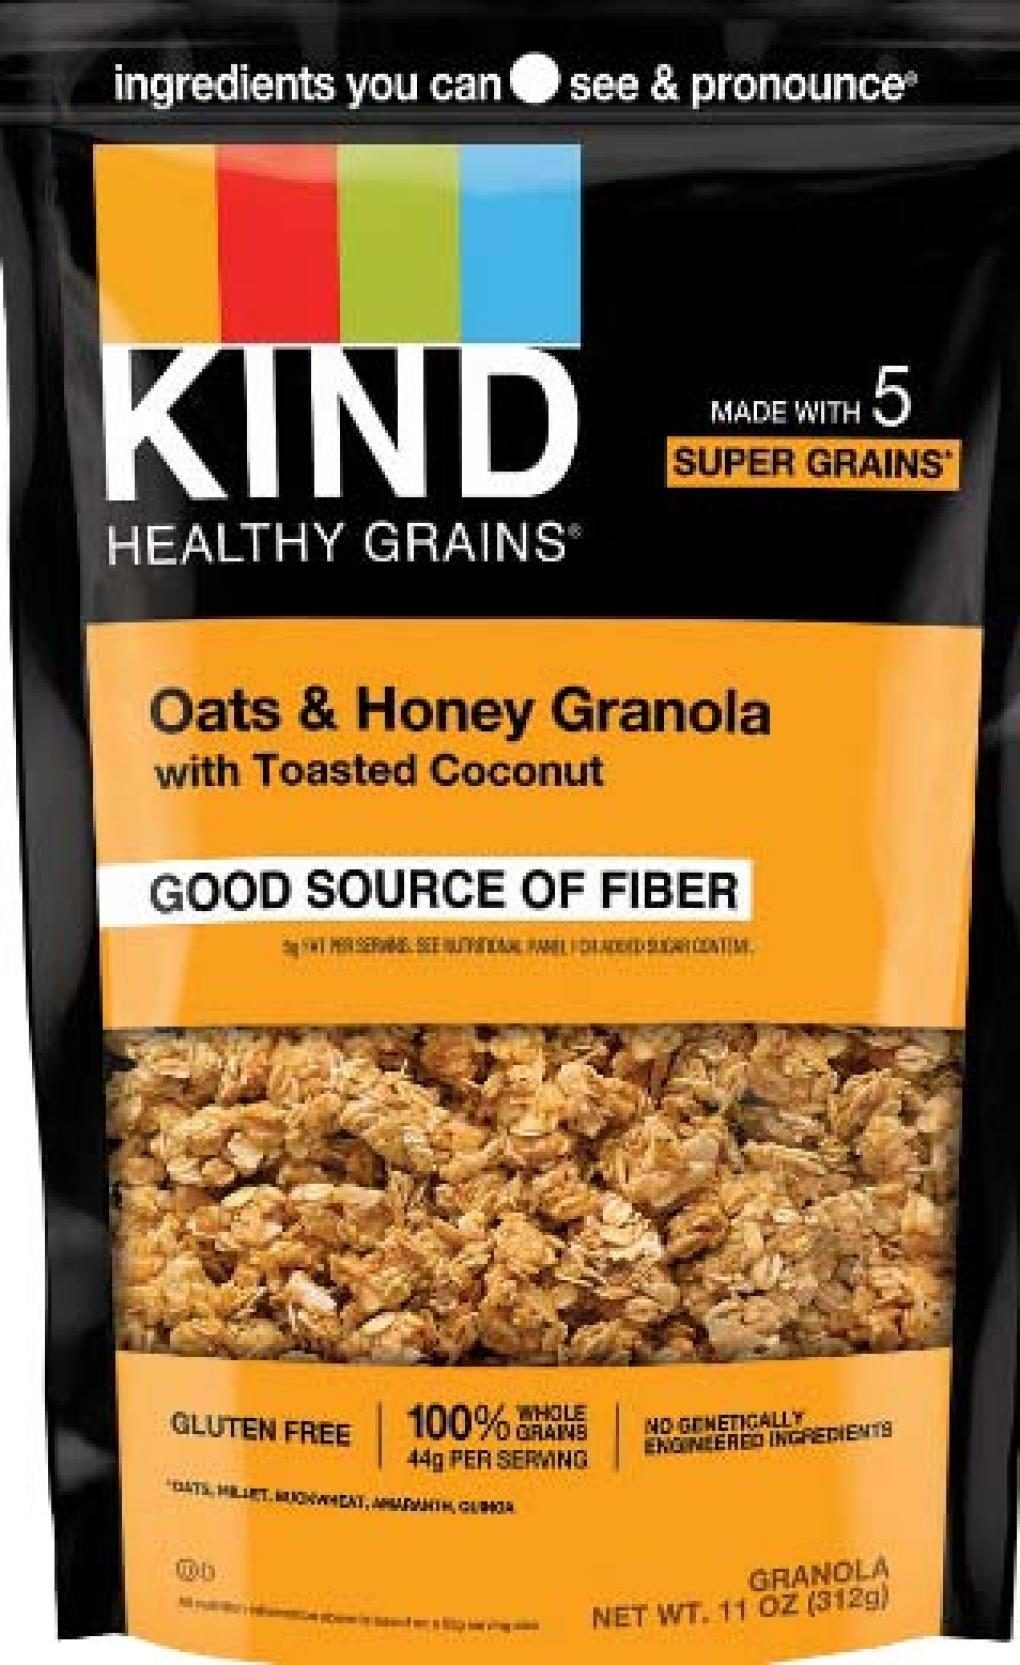 KIND recalls Oats & Honey Granola with Toasted Coconut pouches